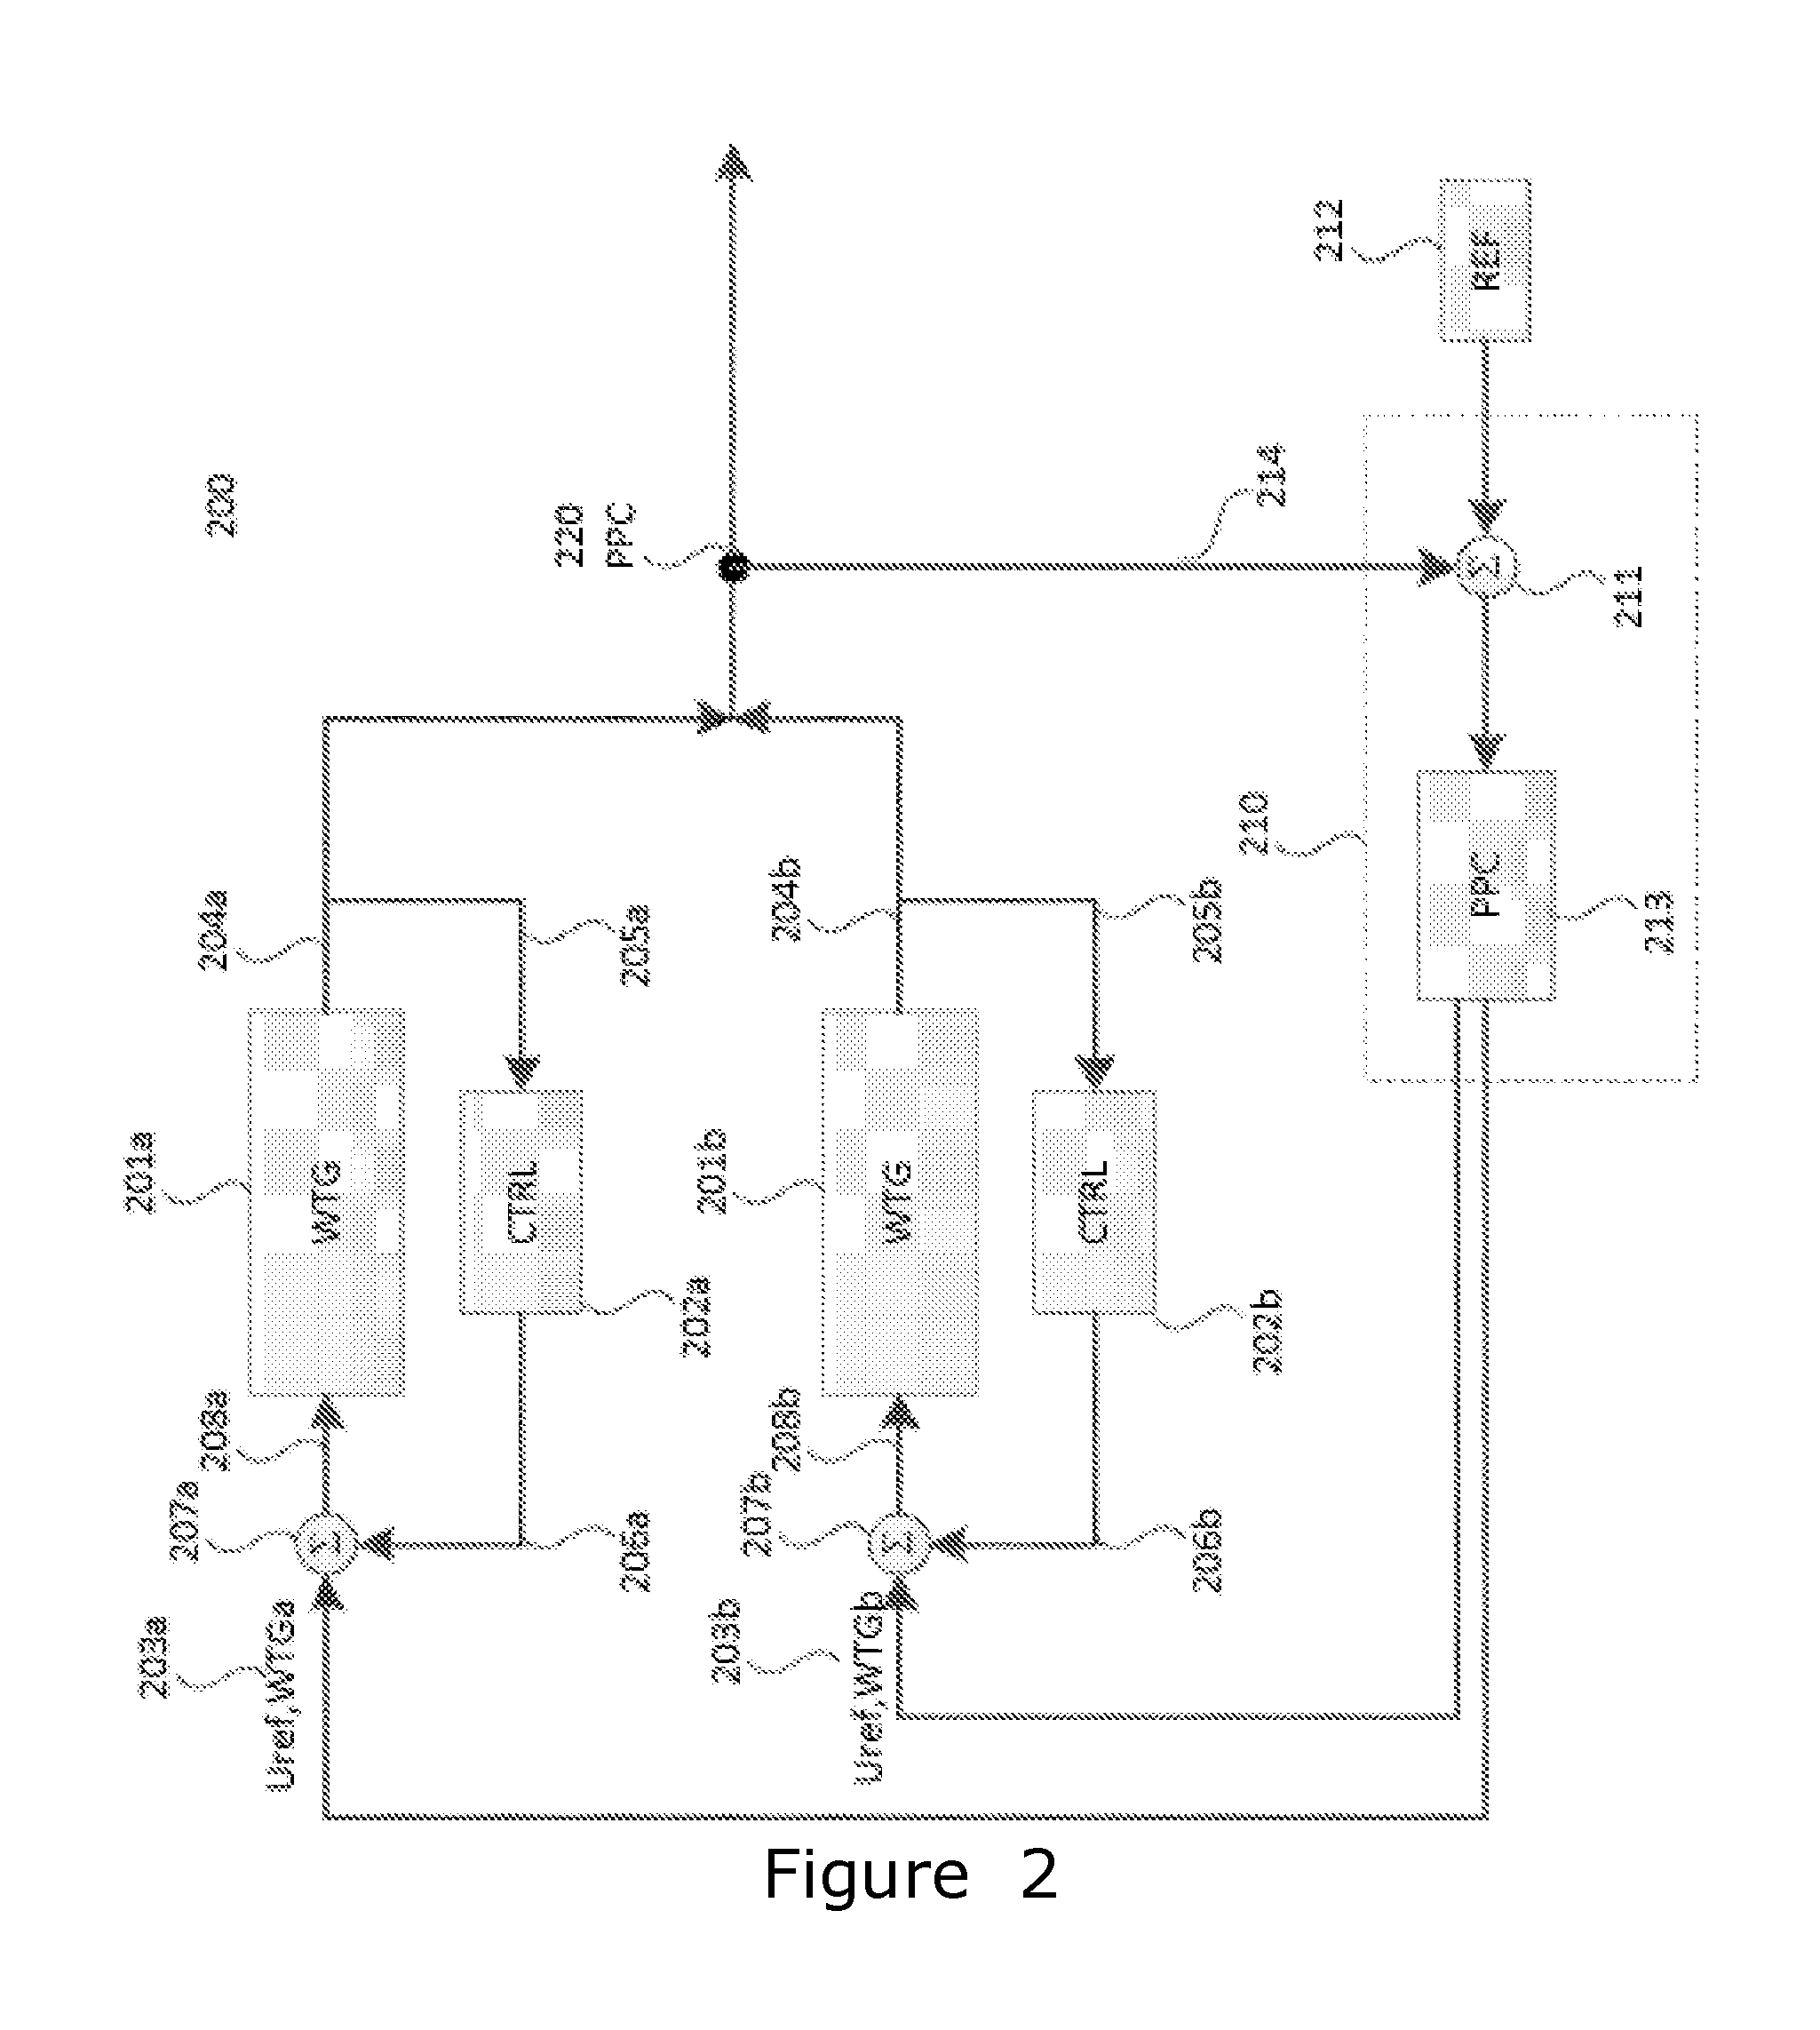 Reconfiguration of the reactive power loop of a wind power plant